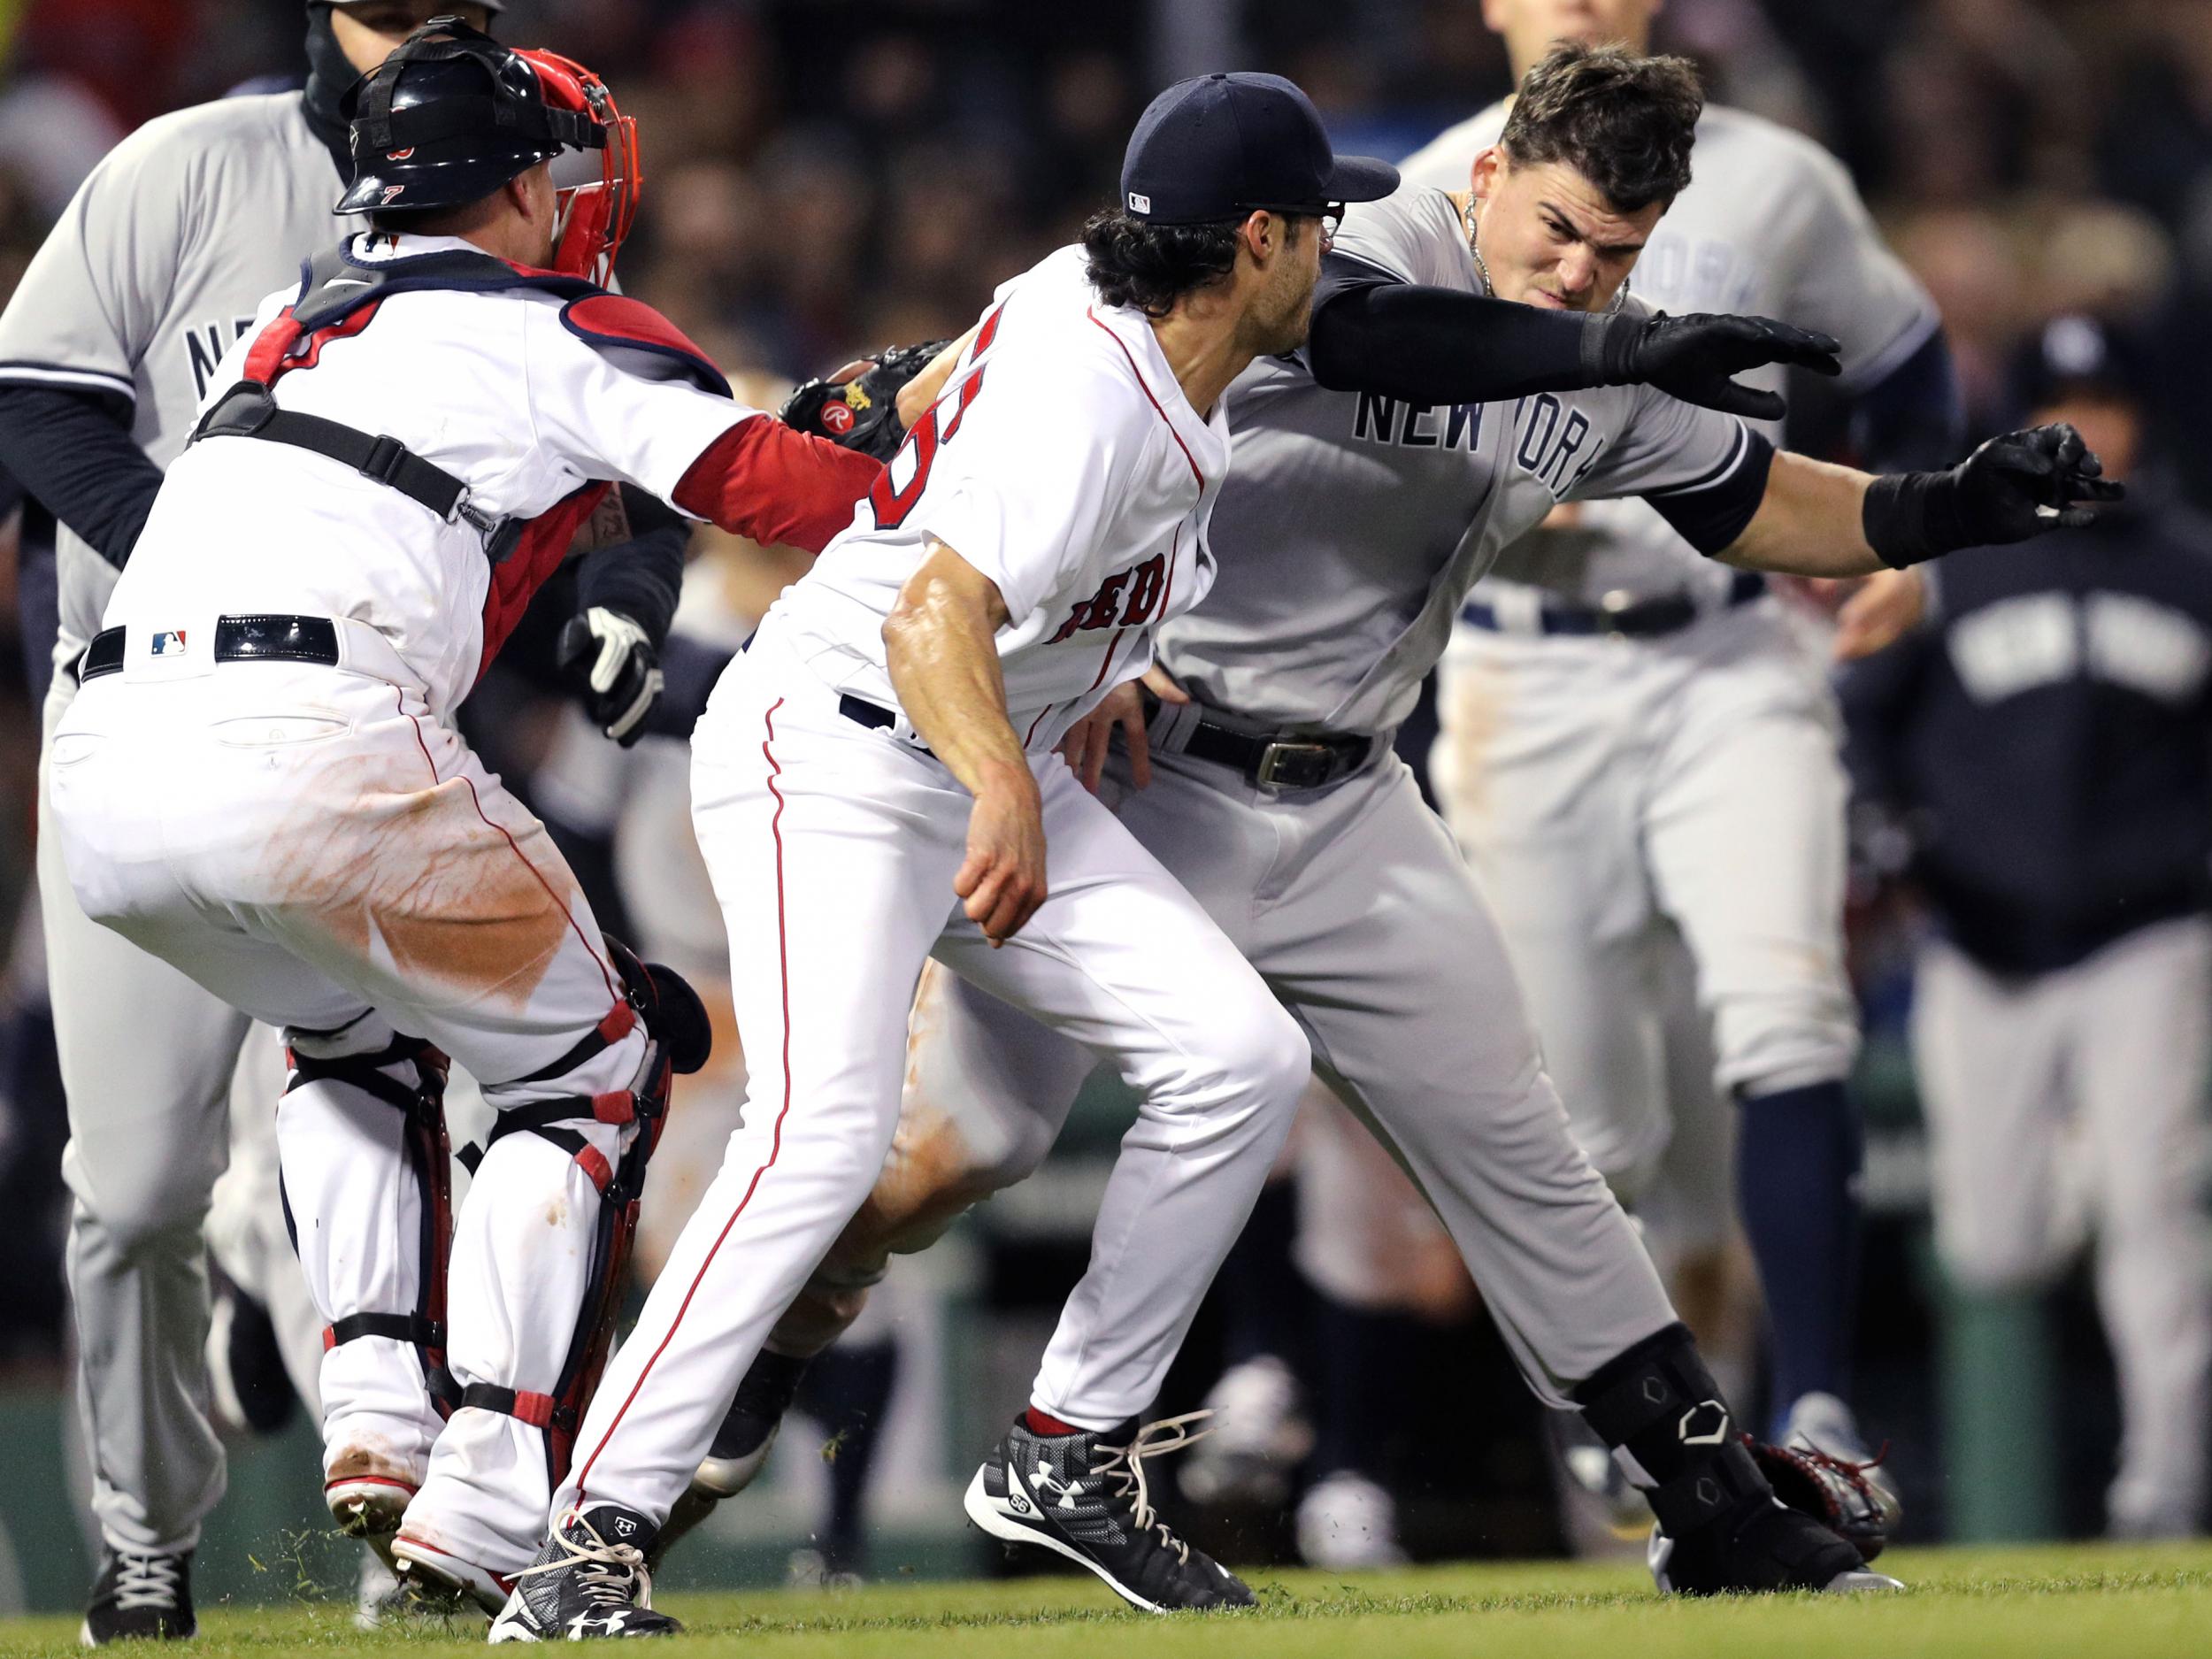 New York Yankees and Boston Red Sox brawl after batter hit by